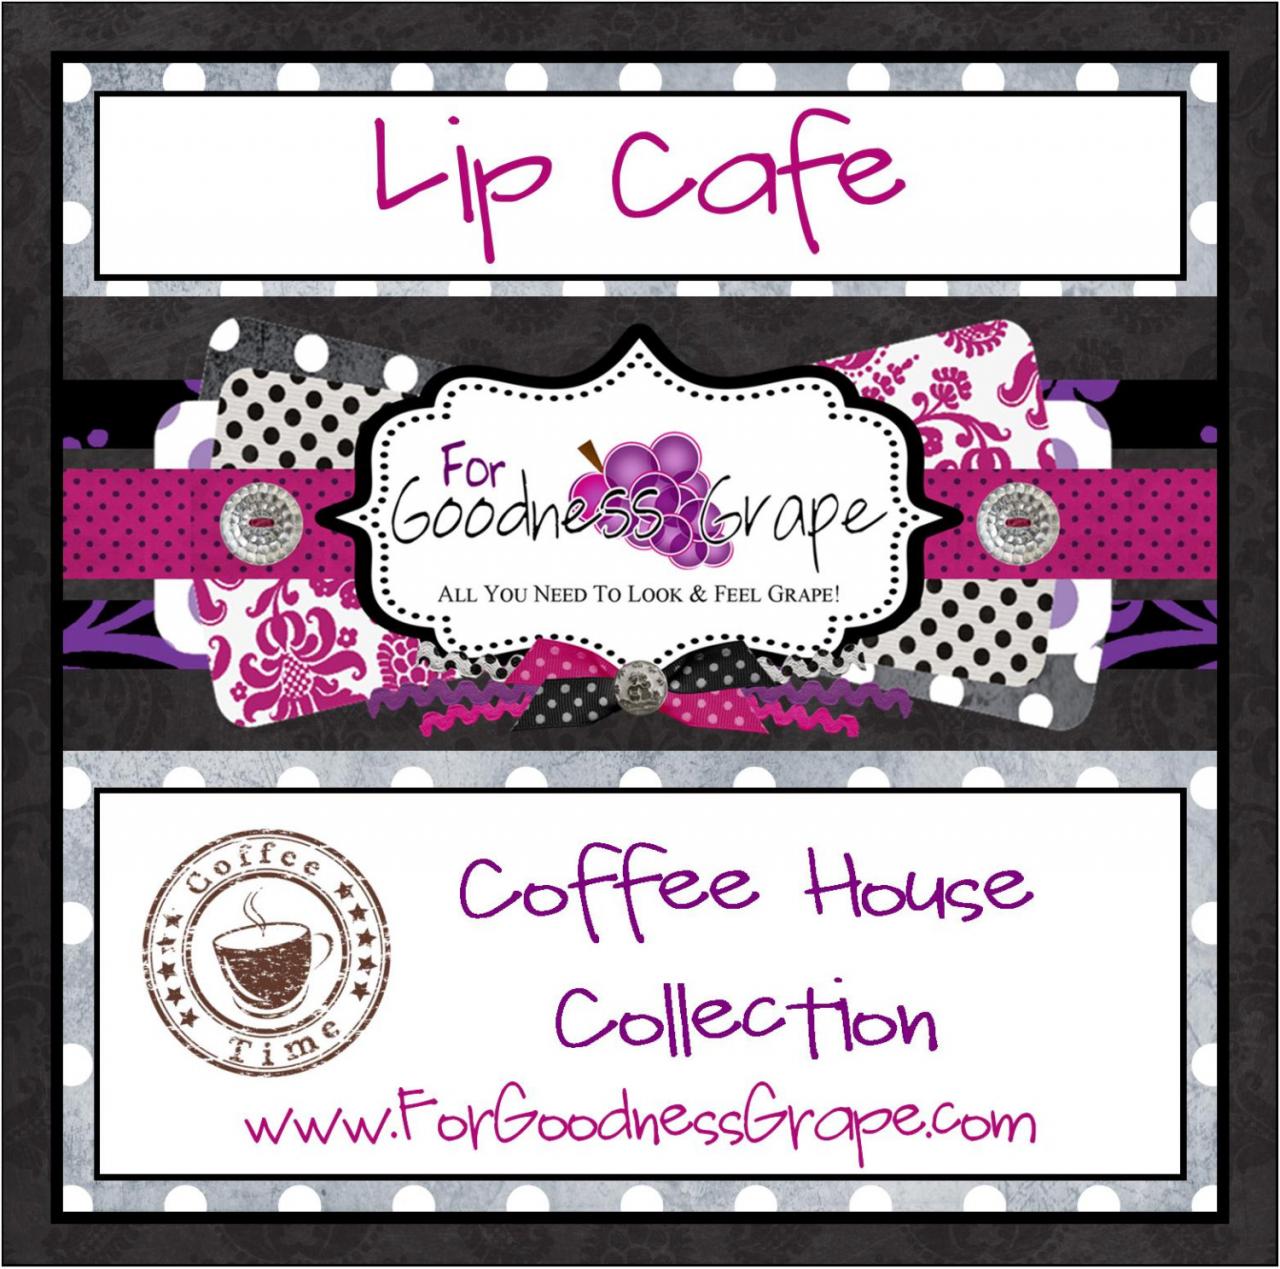 Lip Cafe Coffee House Collection Lip Balm In A Handy Tin - Your Choice Of Any 5 Coffee Inspired Lip Balms In This Listing